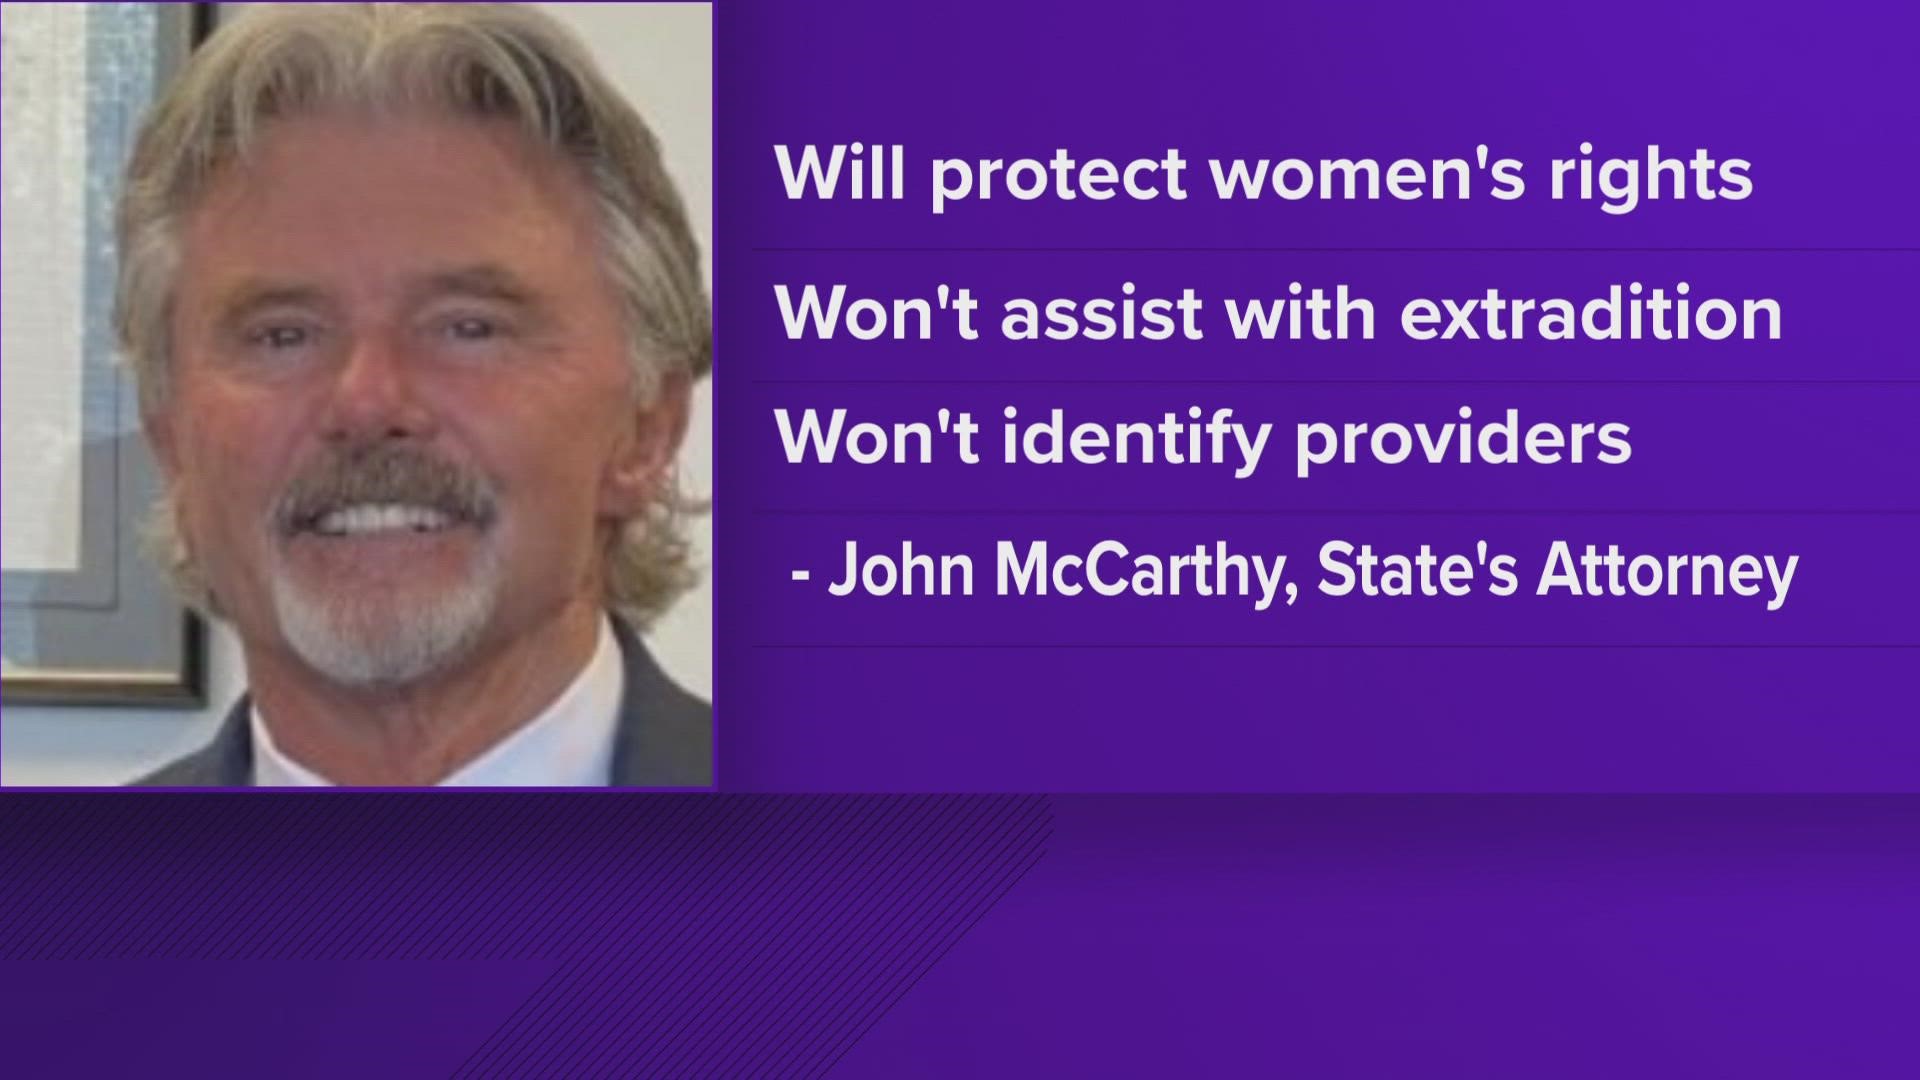 The county is committed to protecting women's reproductive rights and justices' safety.